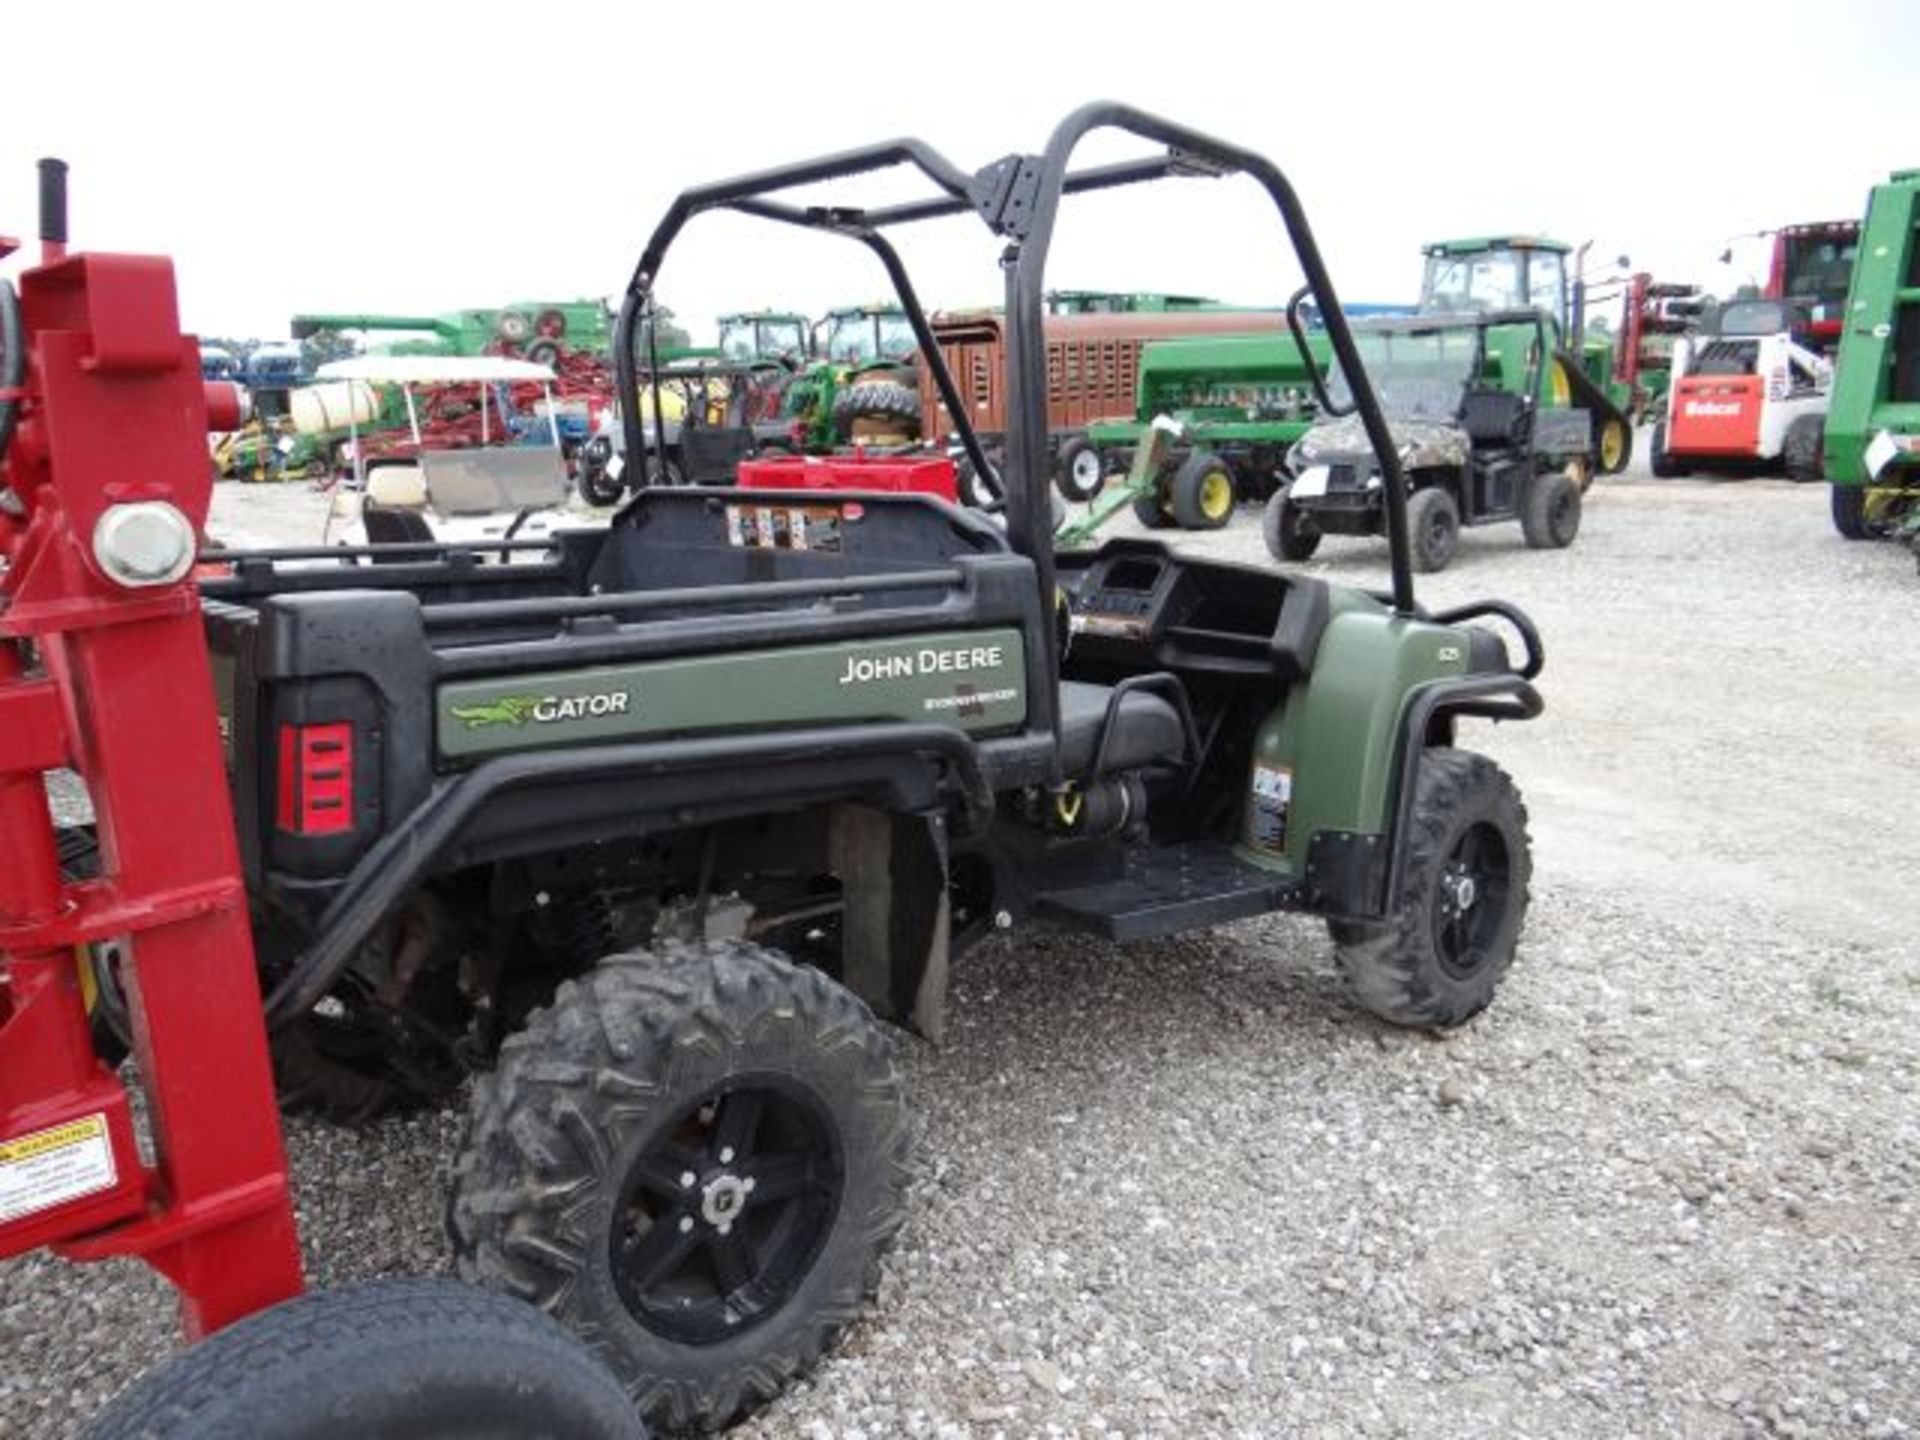 JD 625i Gator, 2012 #112433, 1011 hrs, Black Alloy Wheels, Grill Guard, Rear Protection Pkg - Image 5 of 6